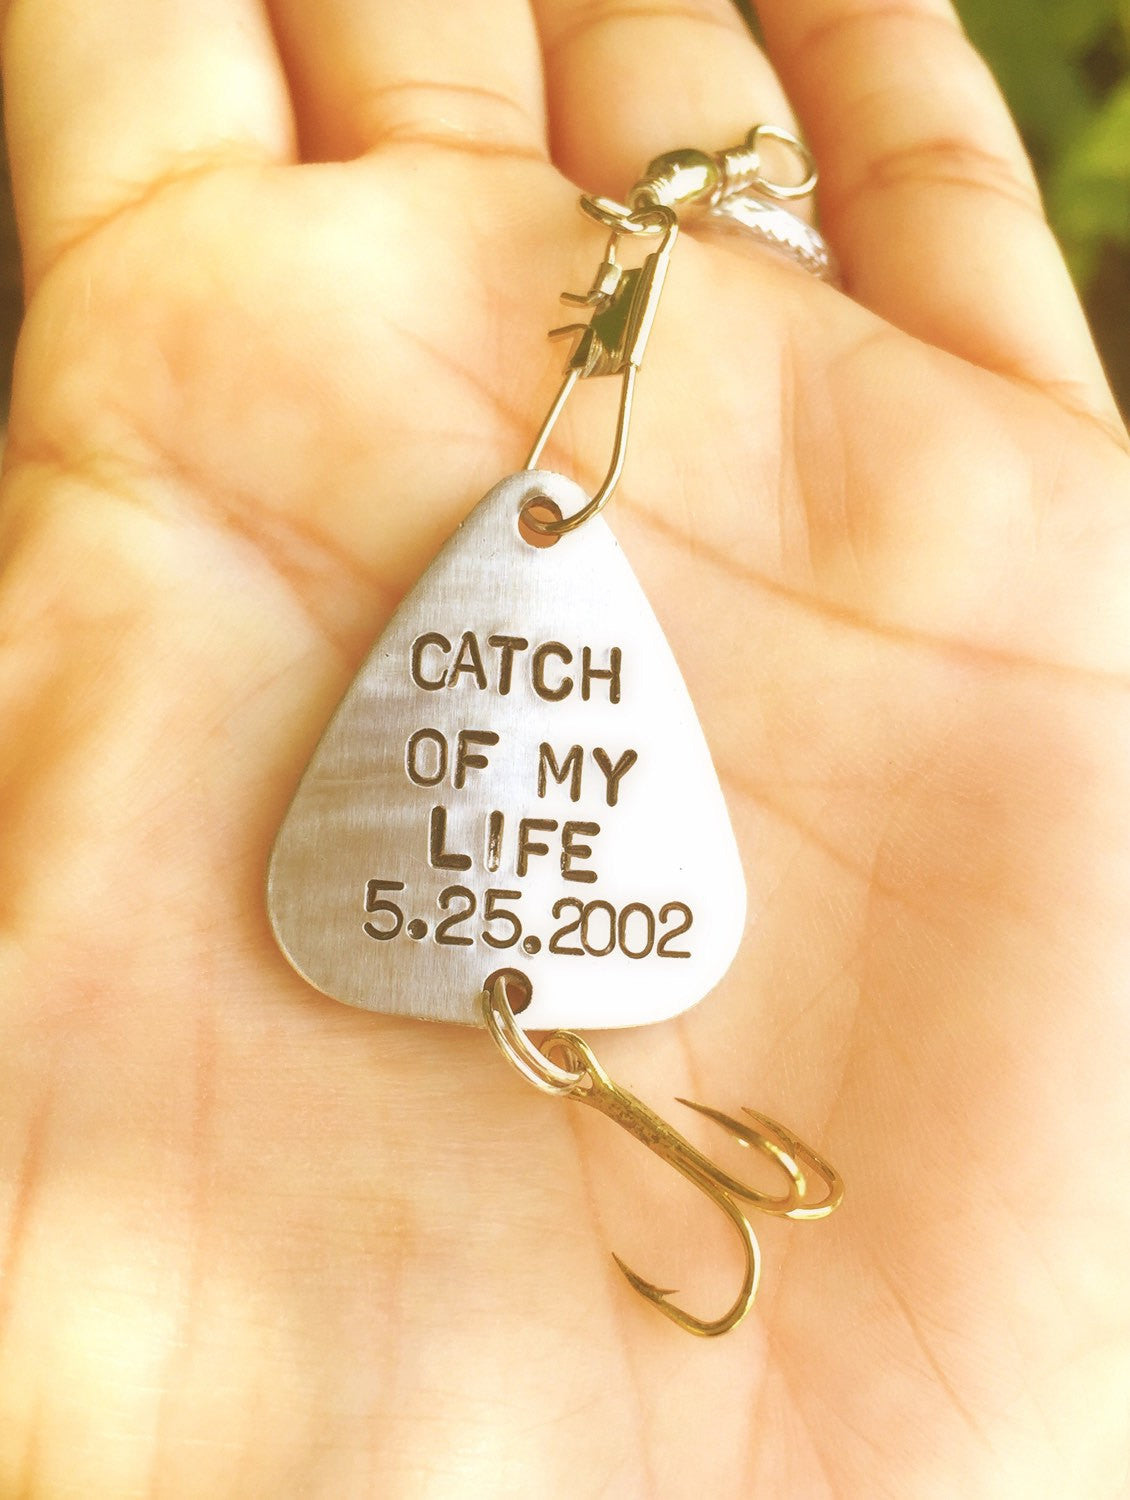 Fishing Lure, Fathers Day, My Best Catch, I'm hooked on you, Personalized For Men, Custom Fisherman Gift, natashaaloha - Natashaaloha, jewelry, bracelets, necklace, keychains, fishing lures, gifts for men, charms, personalized, 